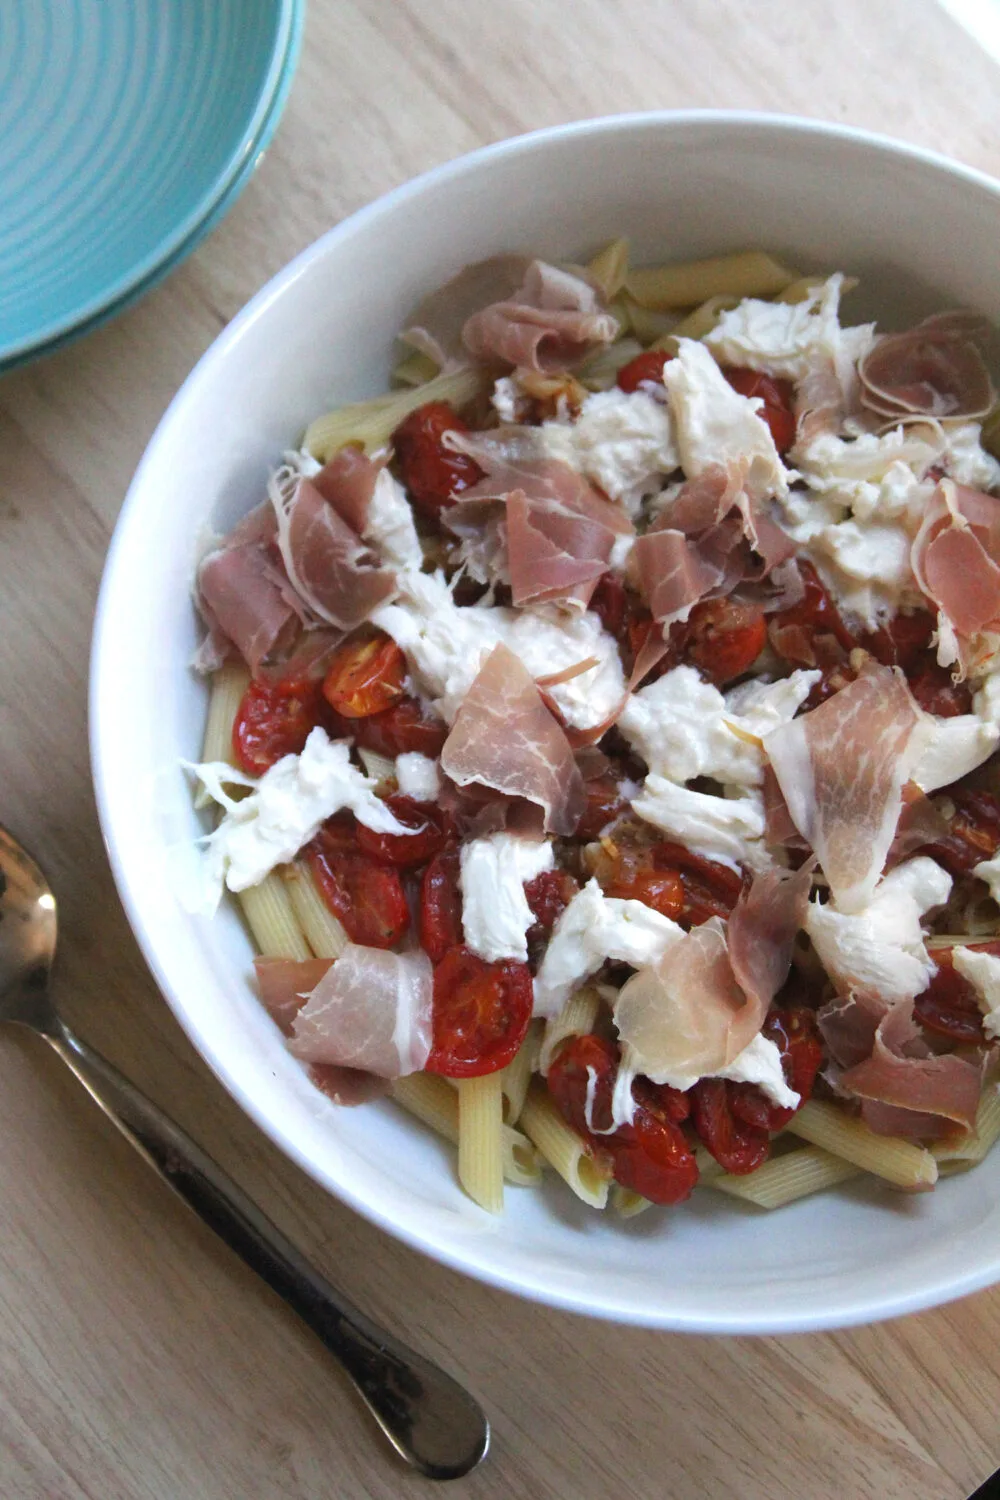 A white bowl is on a wooden surface with turquoise bowls nearby. The bowl contains red roasted tomatoes, white burrata cheese, pink prosciutto and yellow penne pasta.